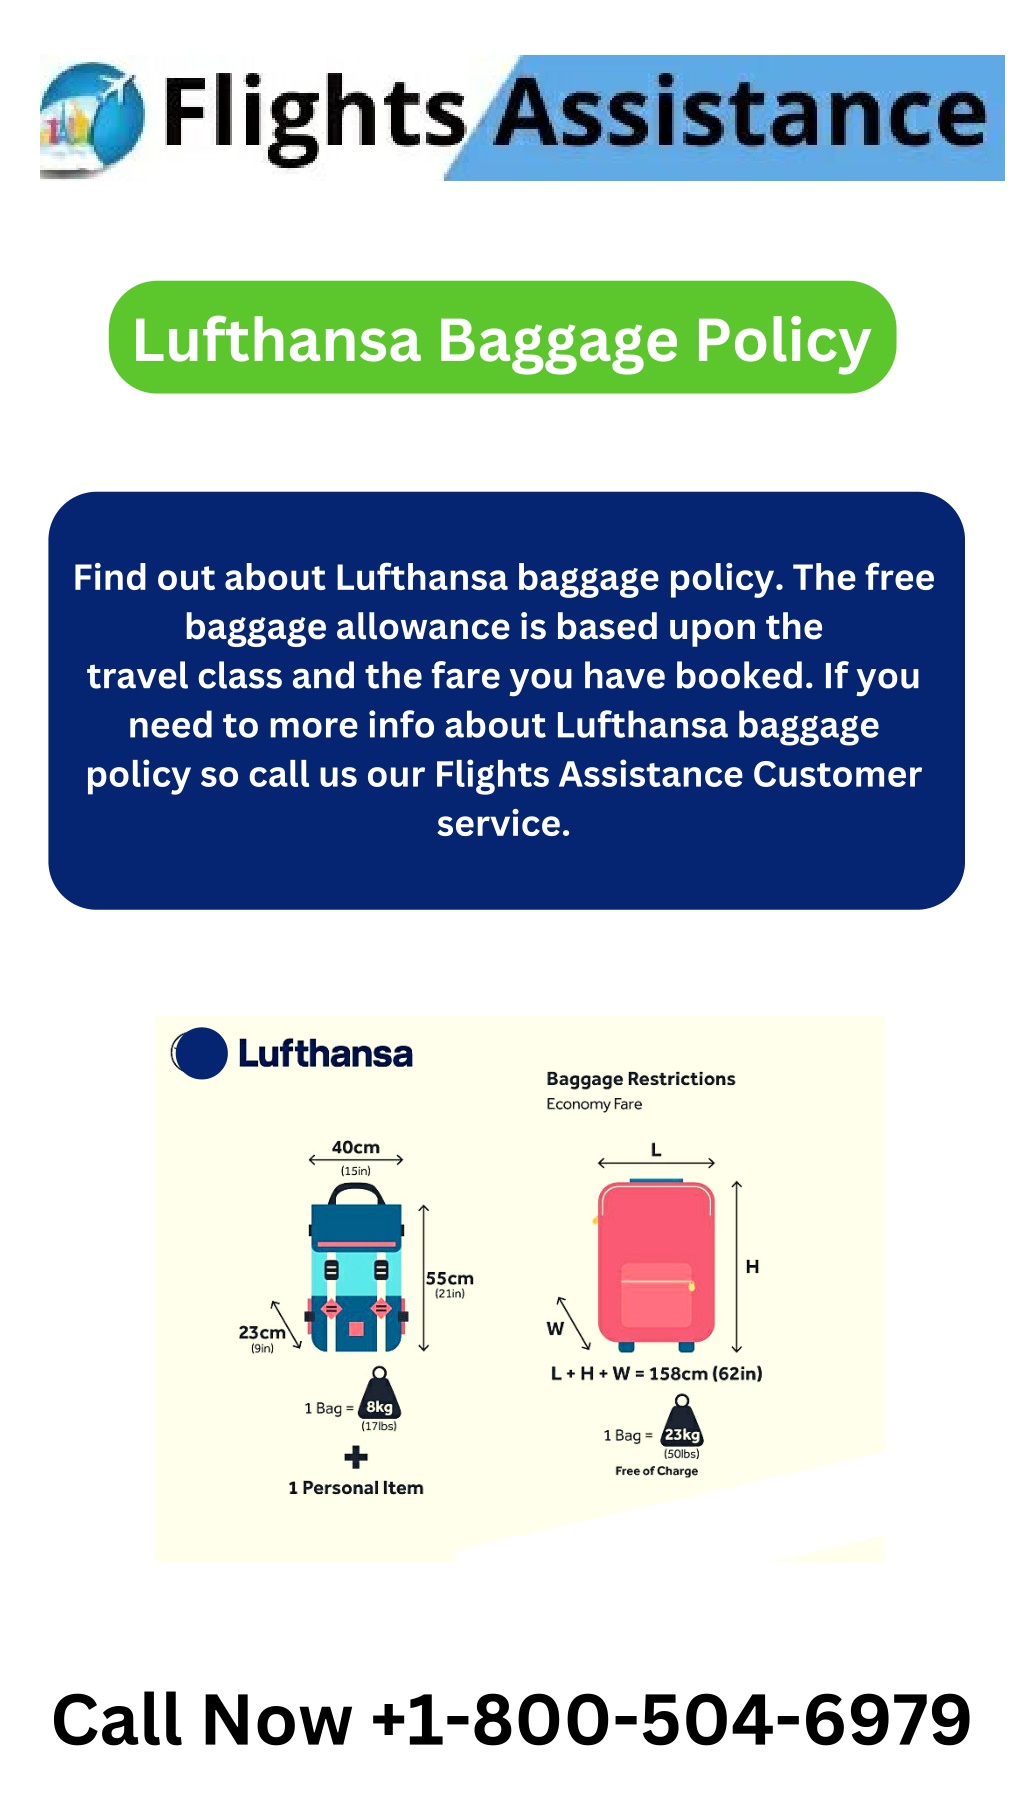 PPT lufthansa baggage policy PowerPoint Presentation, free download